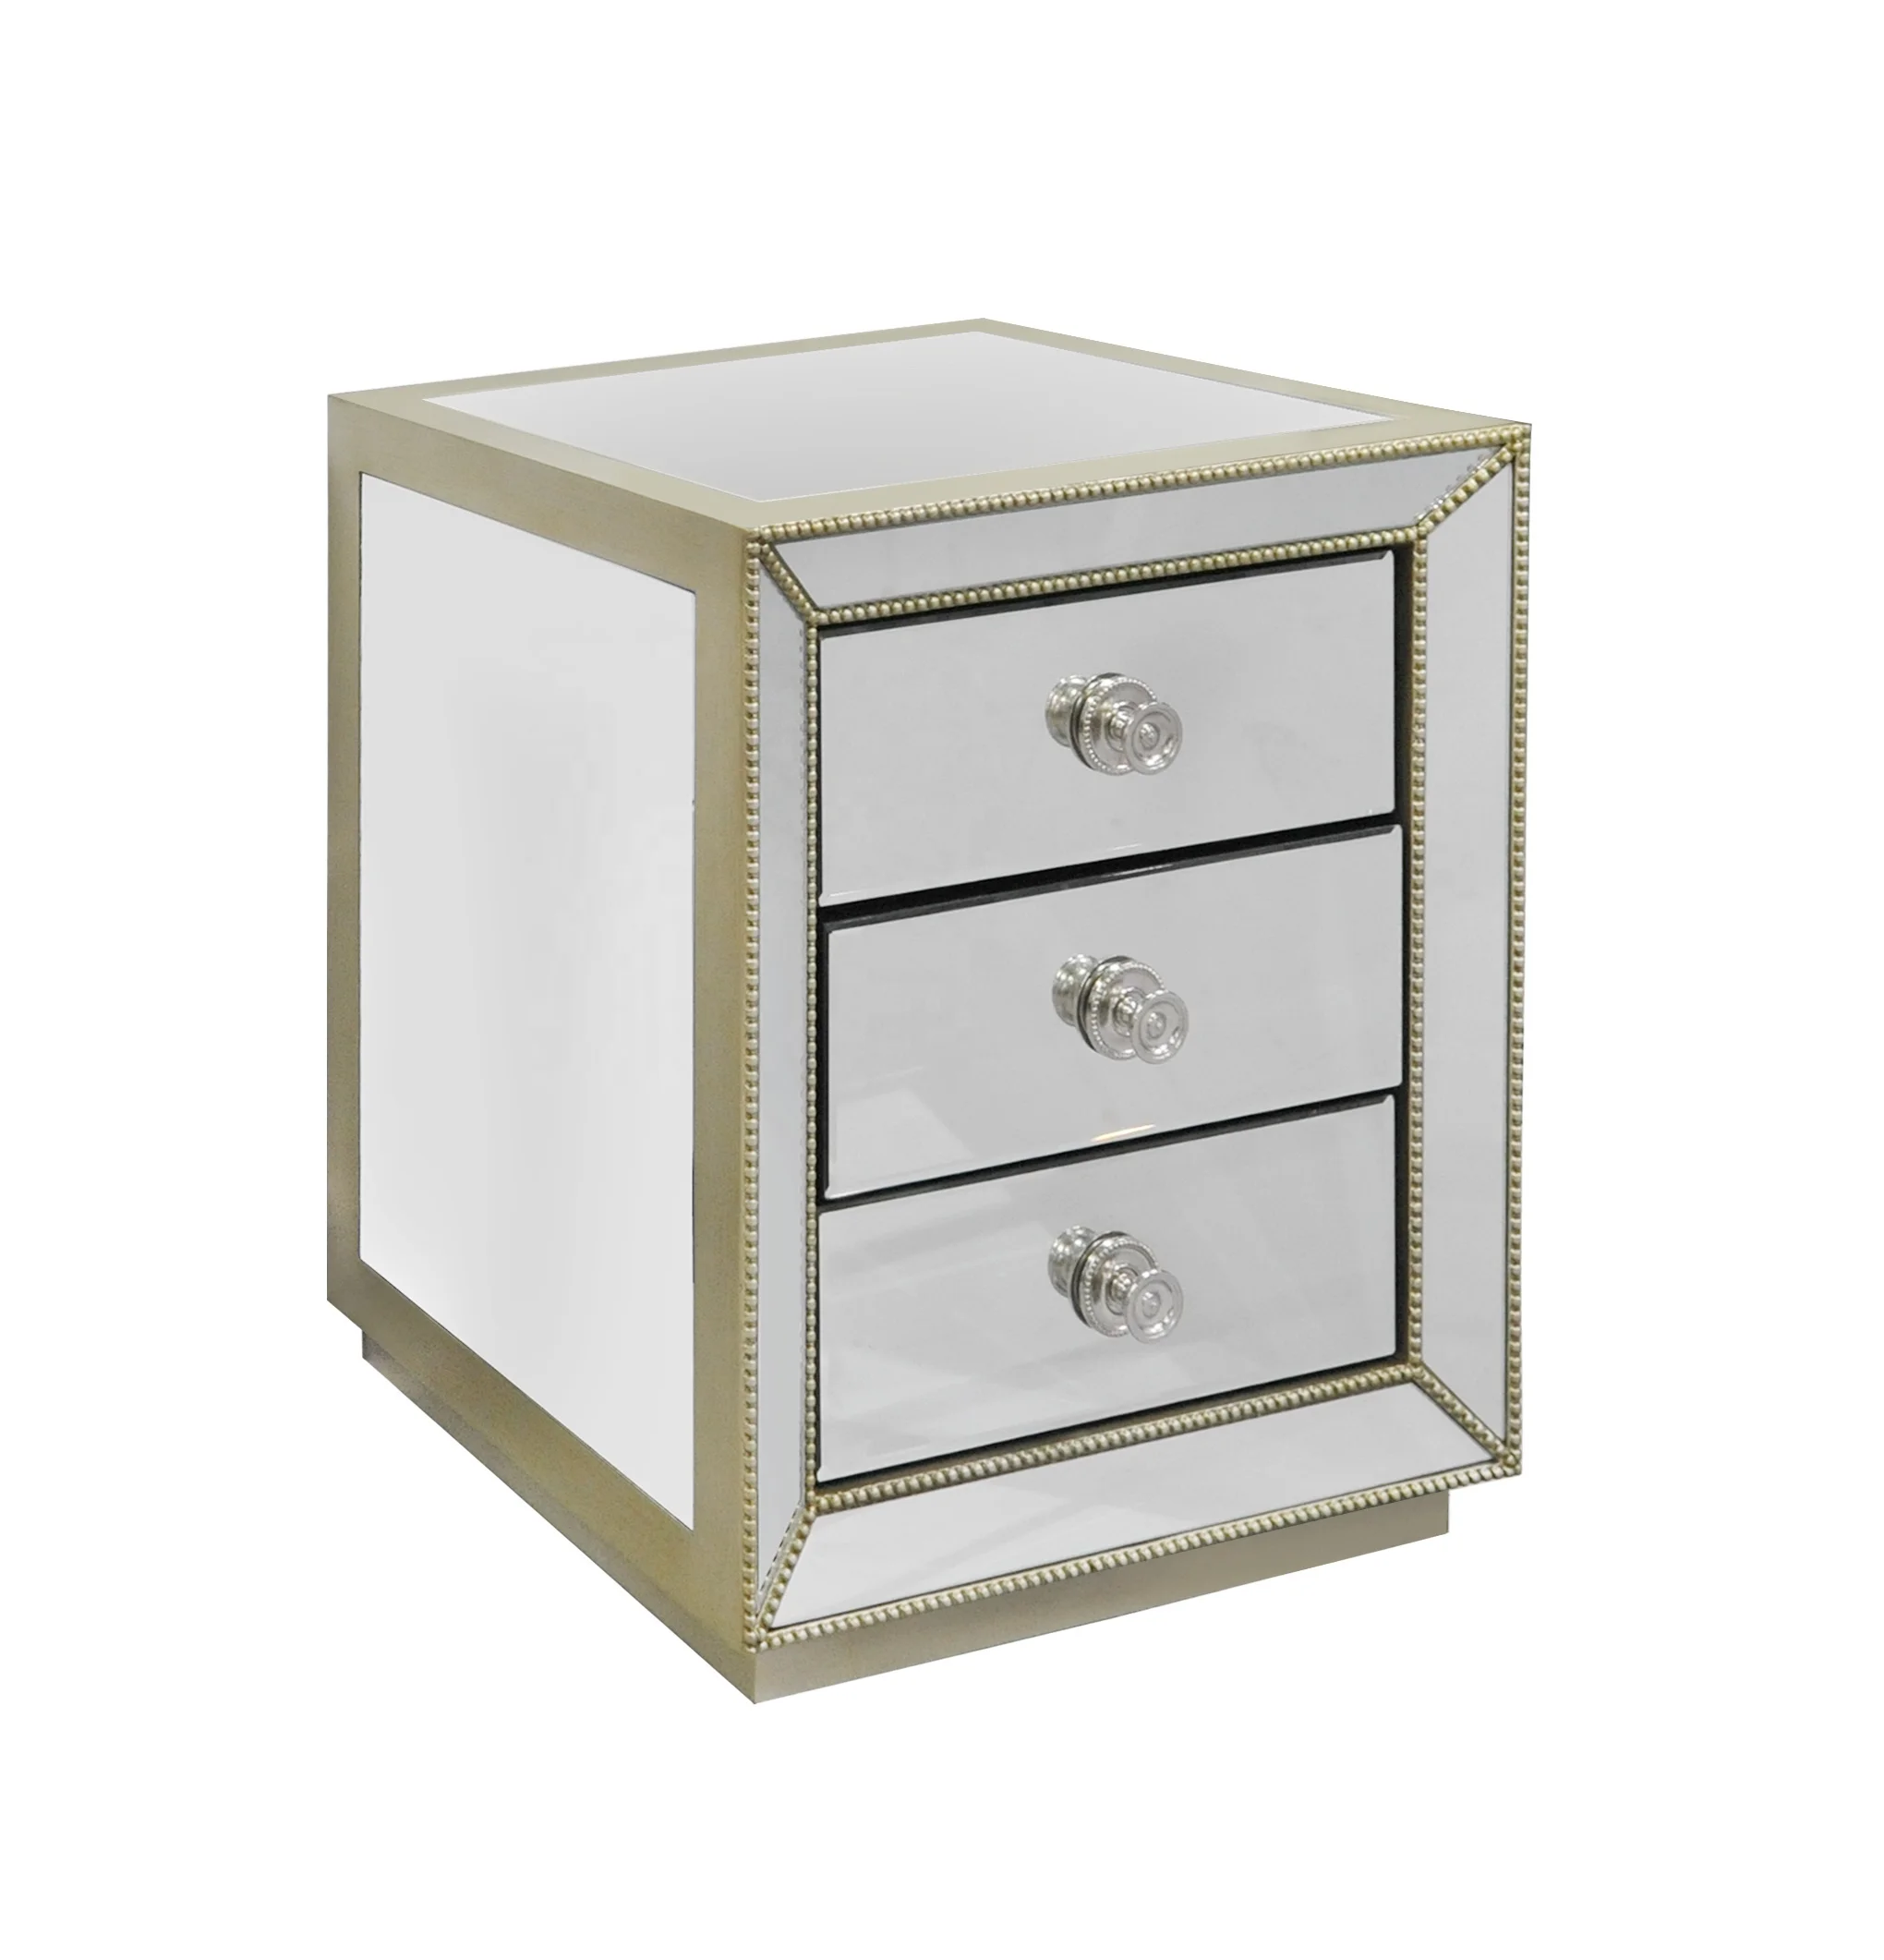 Modern Hot selling Handmade Large Storage 3 drawers with Gold Beading Trim Wooden Mirrored Cabinet Chest Nightstand